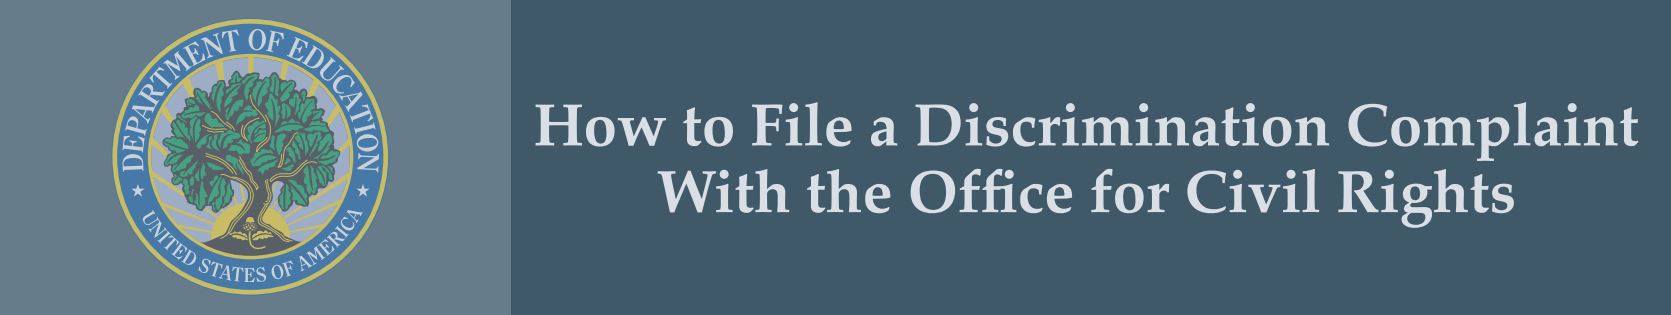 Picture: How to file a discrimination complaint with the Office of Civil Rights